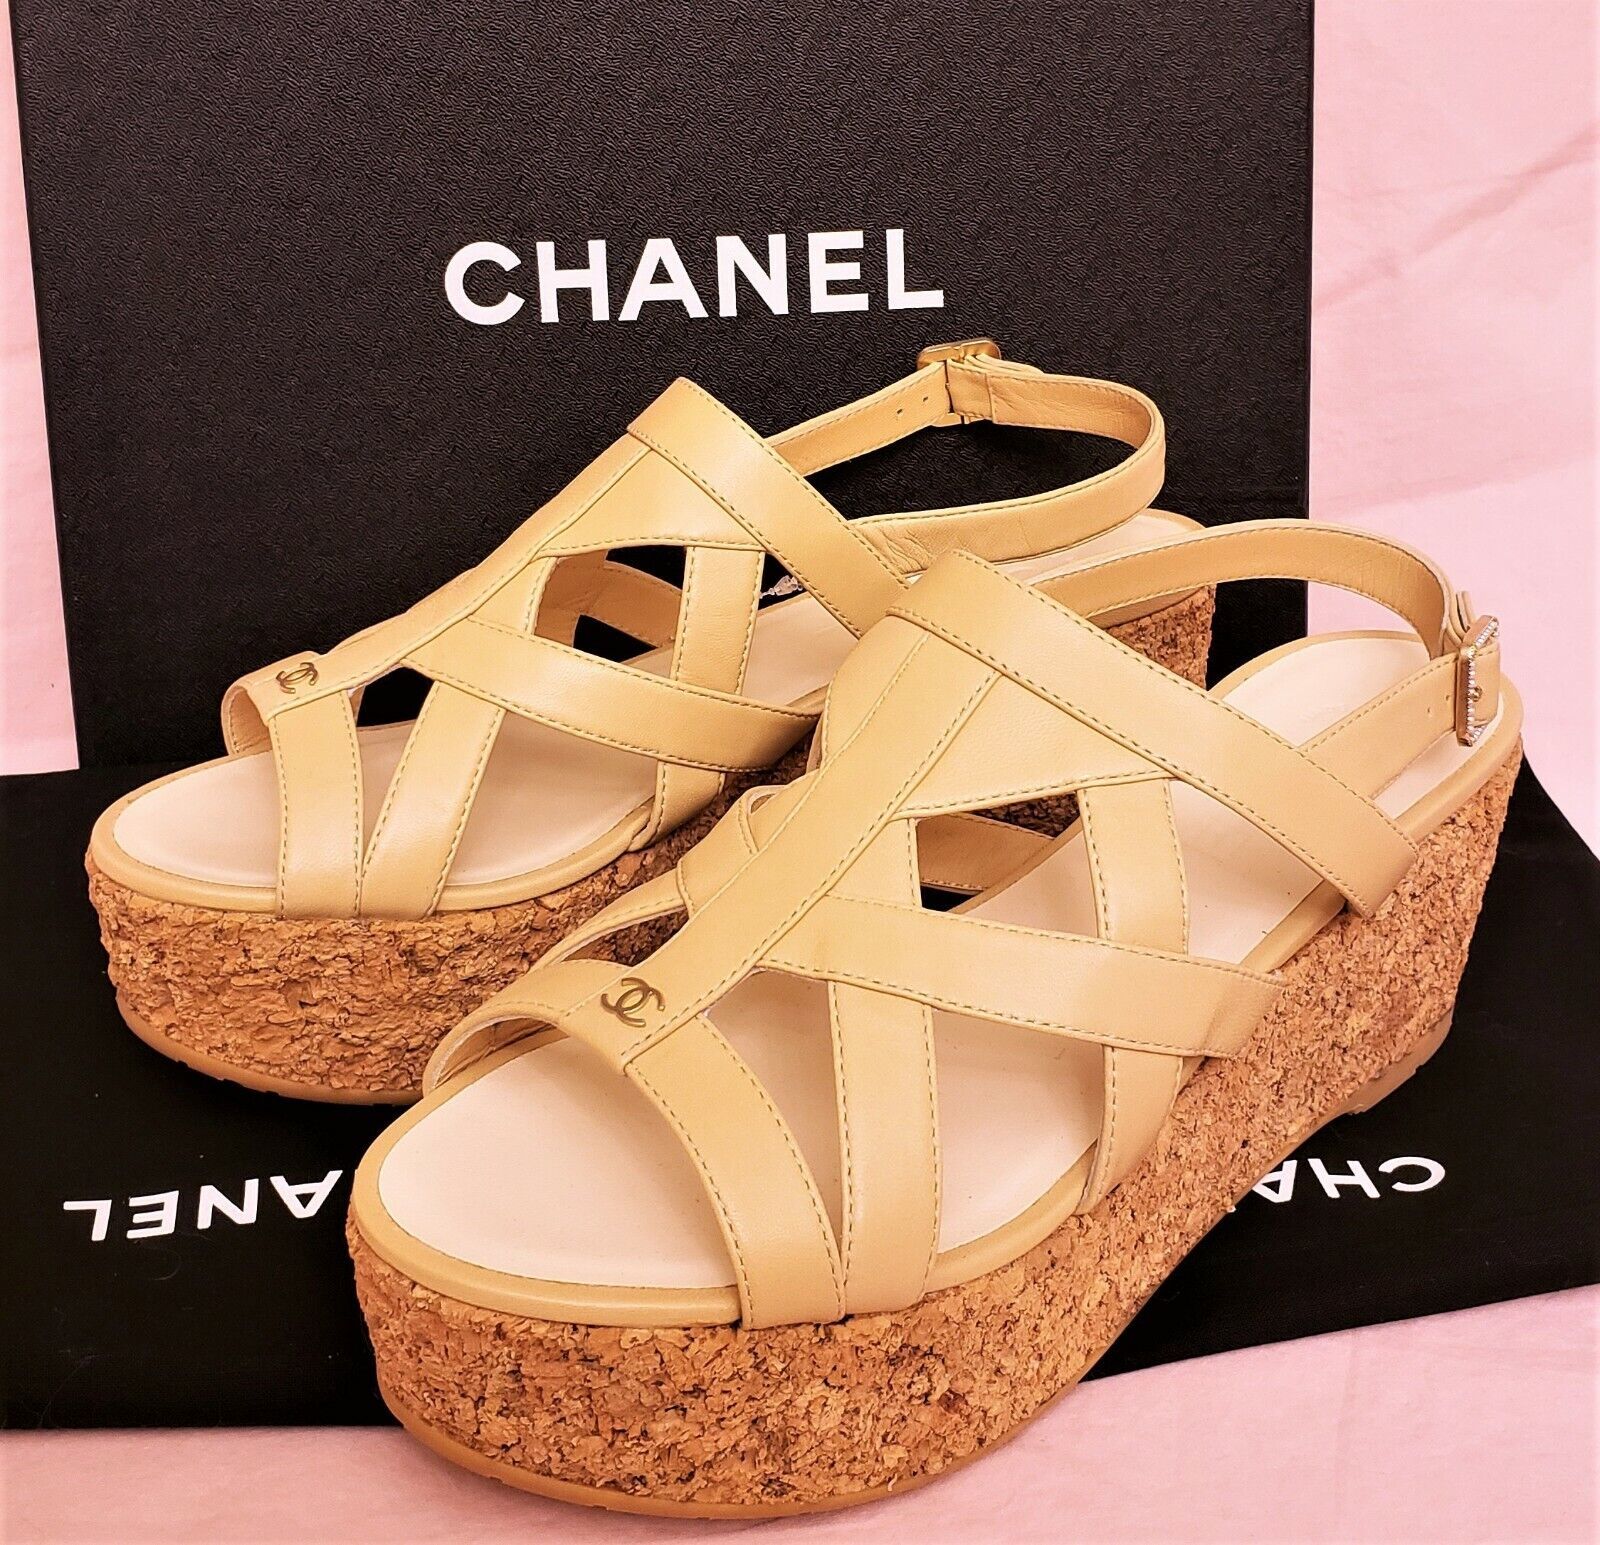 CHANEL Sandals Platform Wedge Sz: and 50 similar items